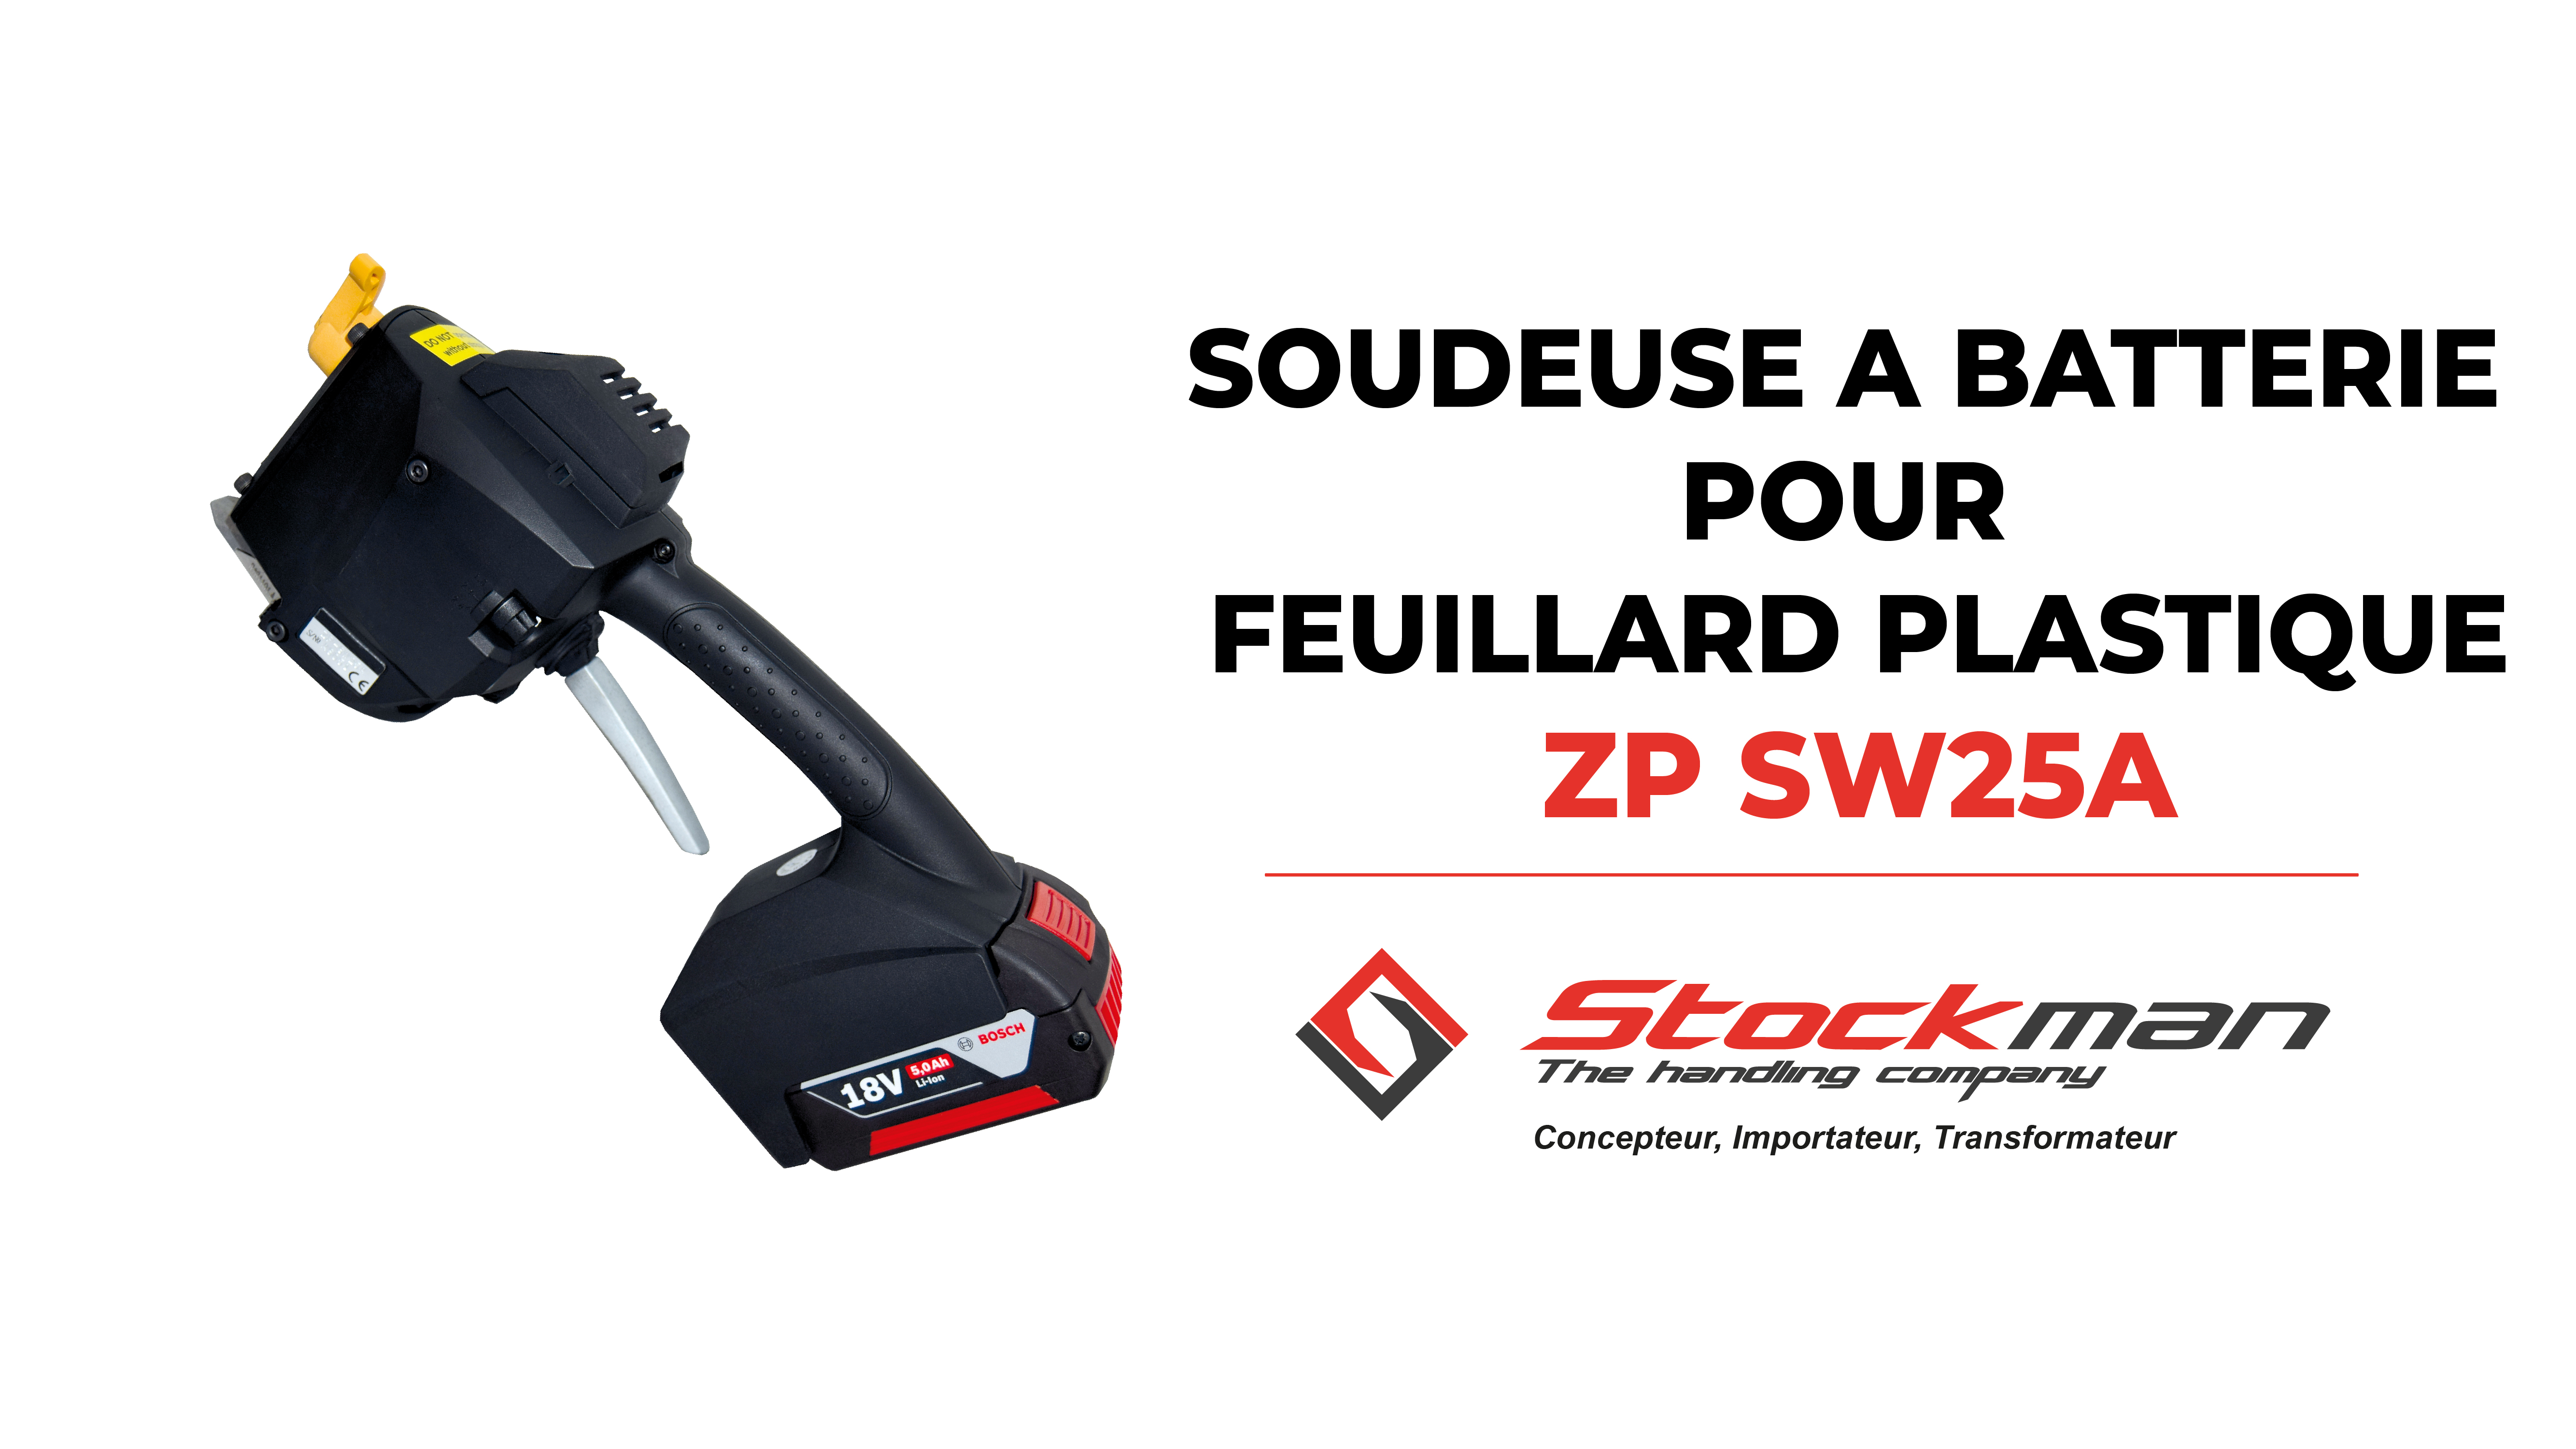 The battery powered plastic strapping tool ZP-SW25A
